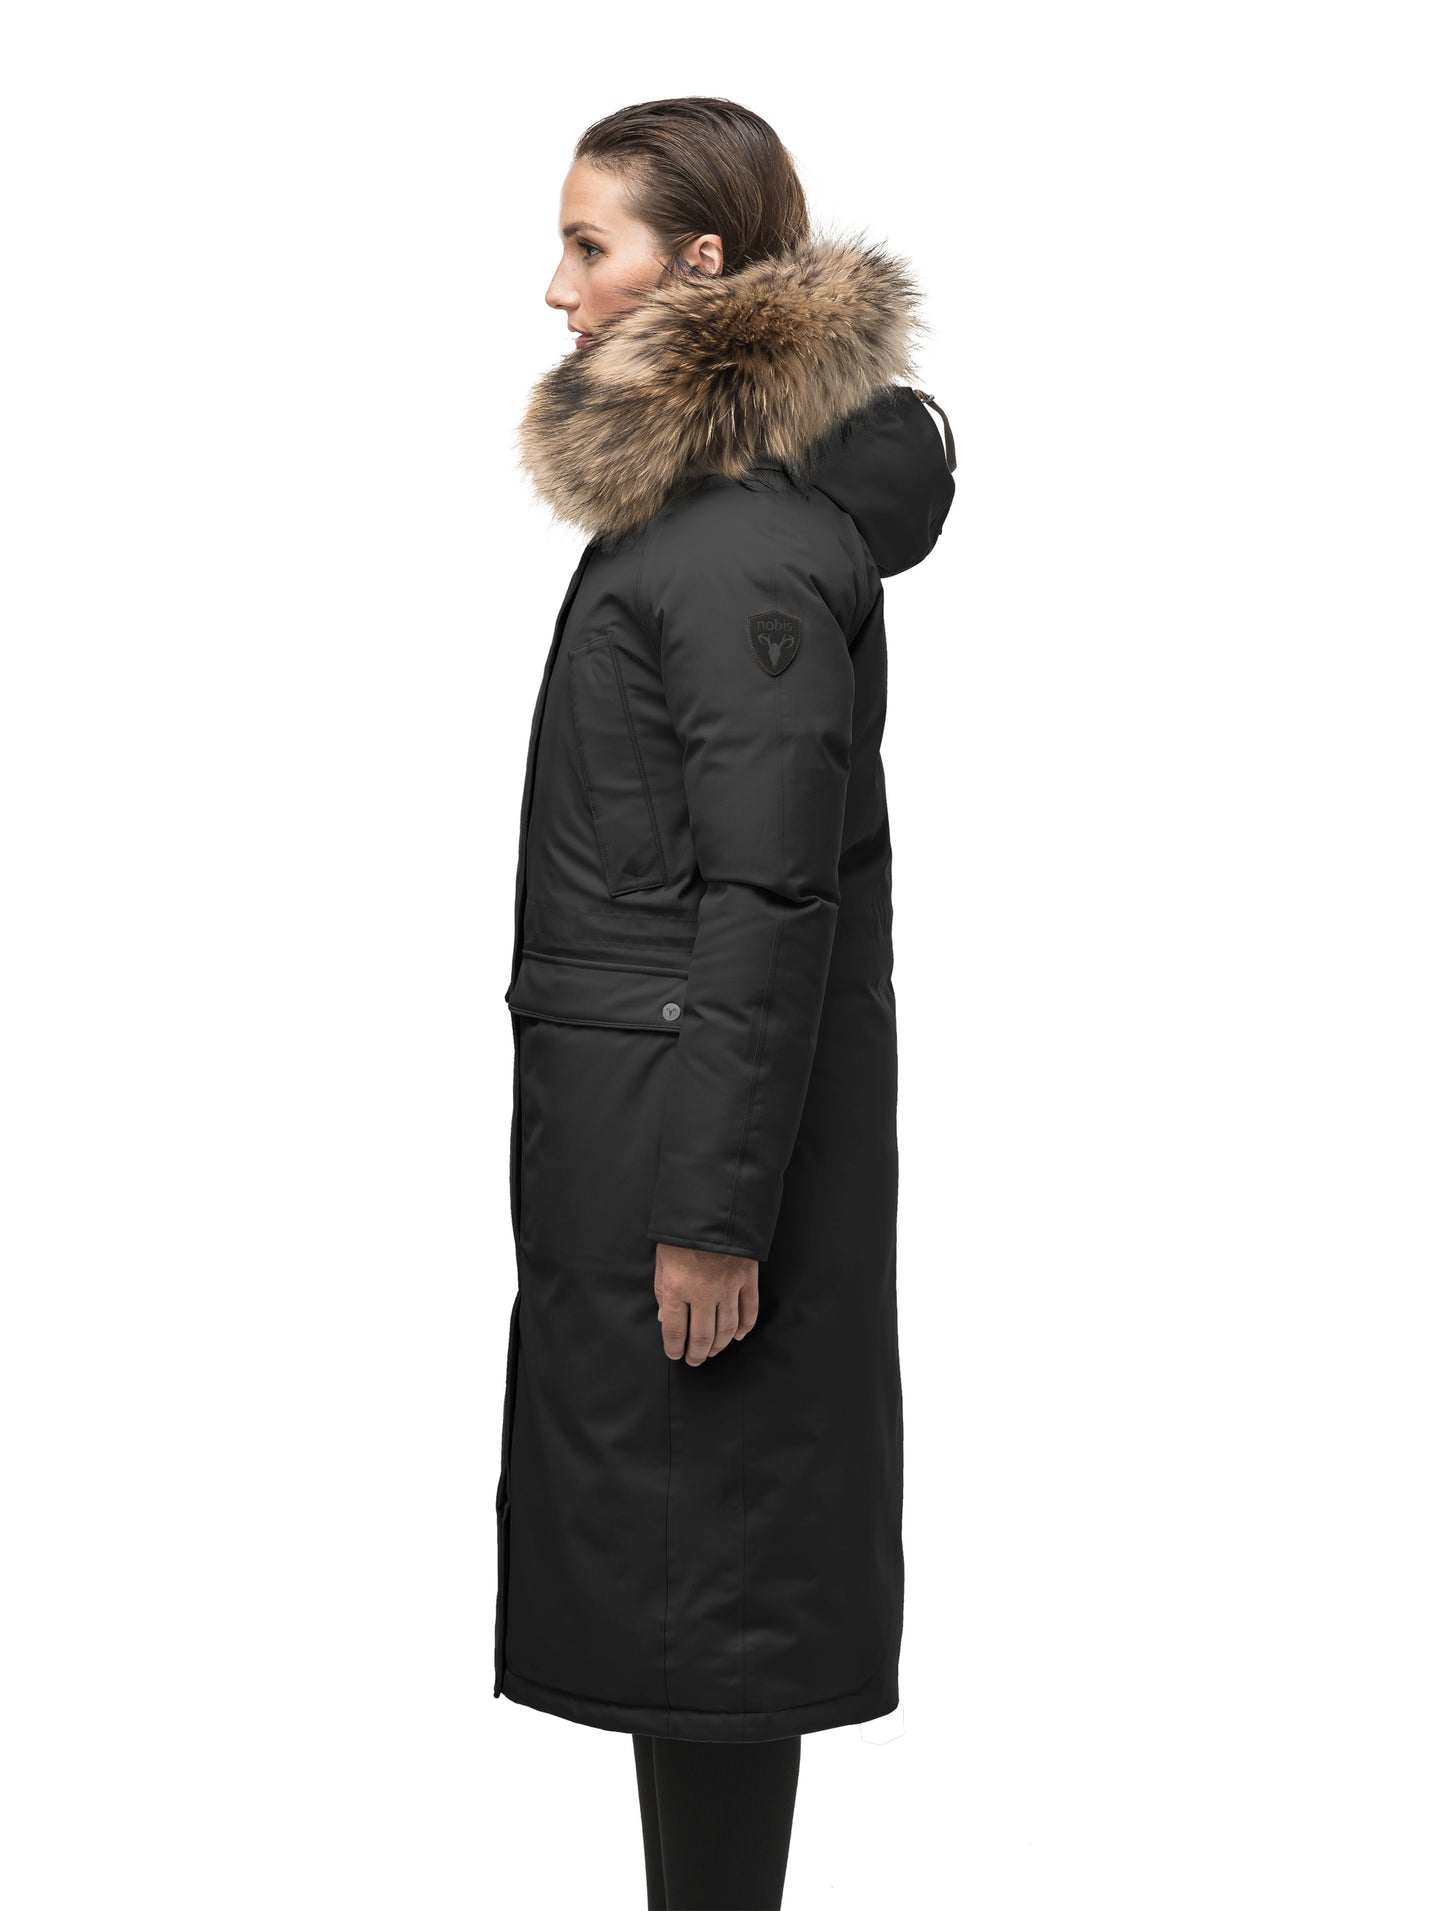 Ladies knee length down-filled parka with four exterior pockets, and a non-removable hood with detachable fur trim in Black